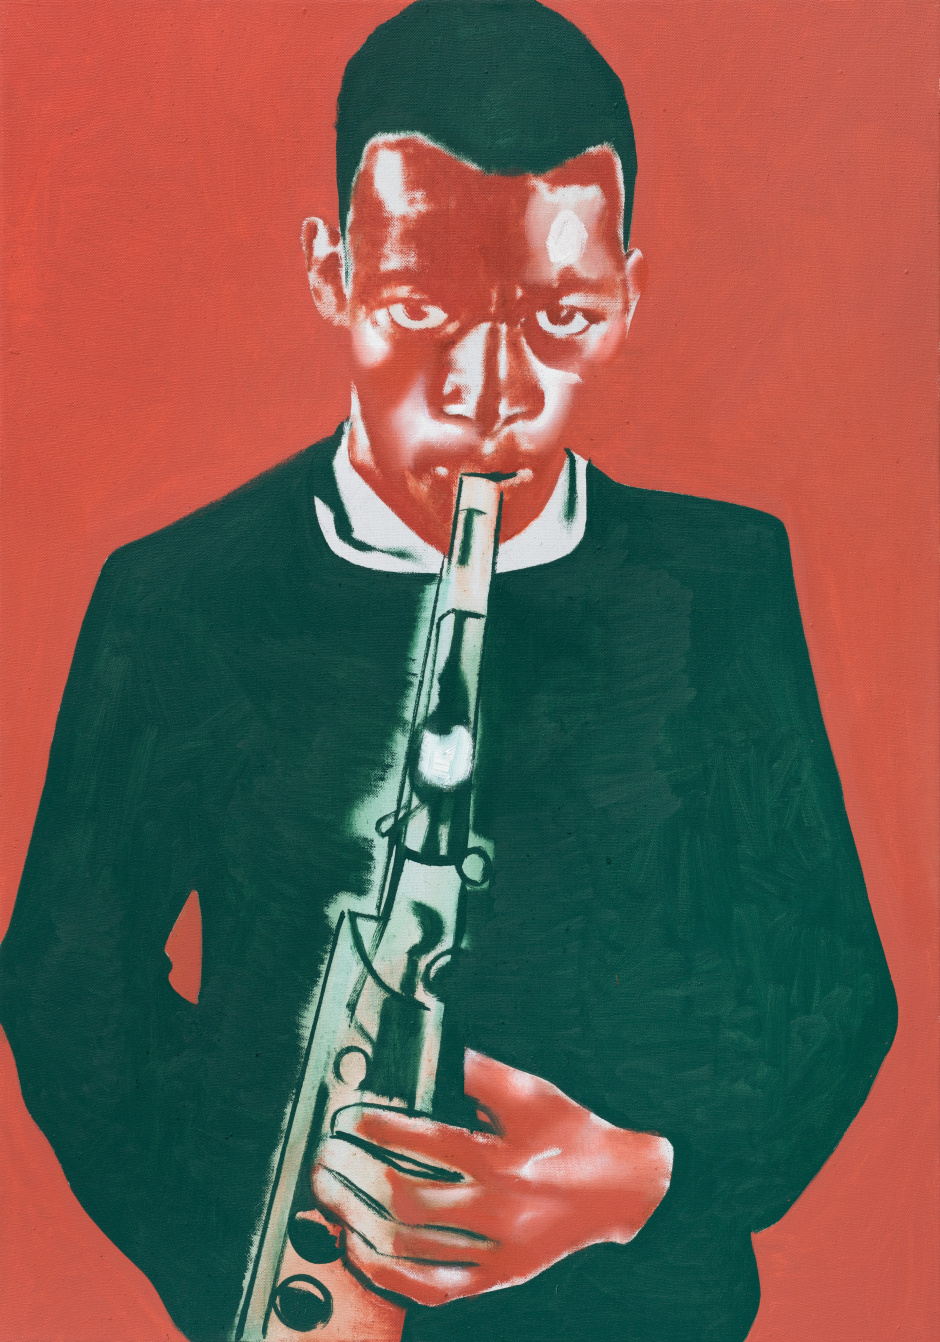 Ornette Coleman, 2020  oil on canvas  100 x 70 x 3 cm / 39 3/8 x 27 1/2 x 1 1/8 in